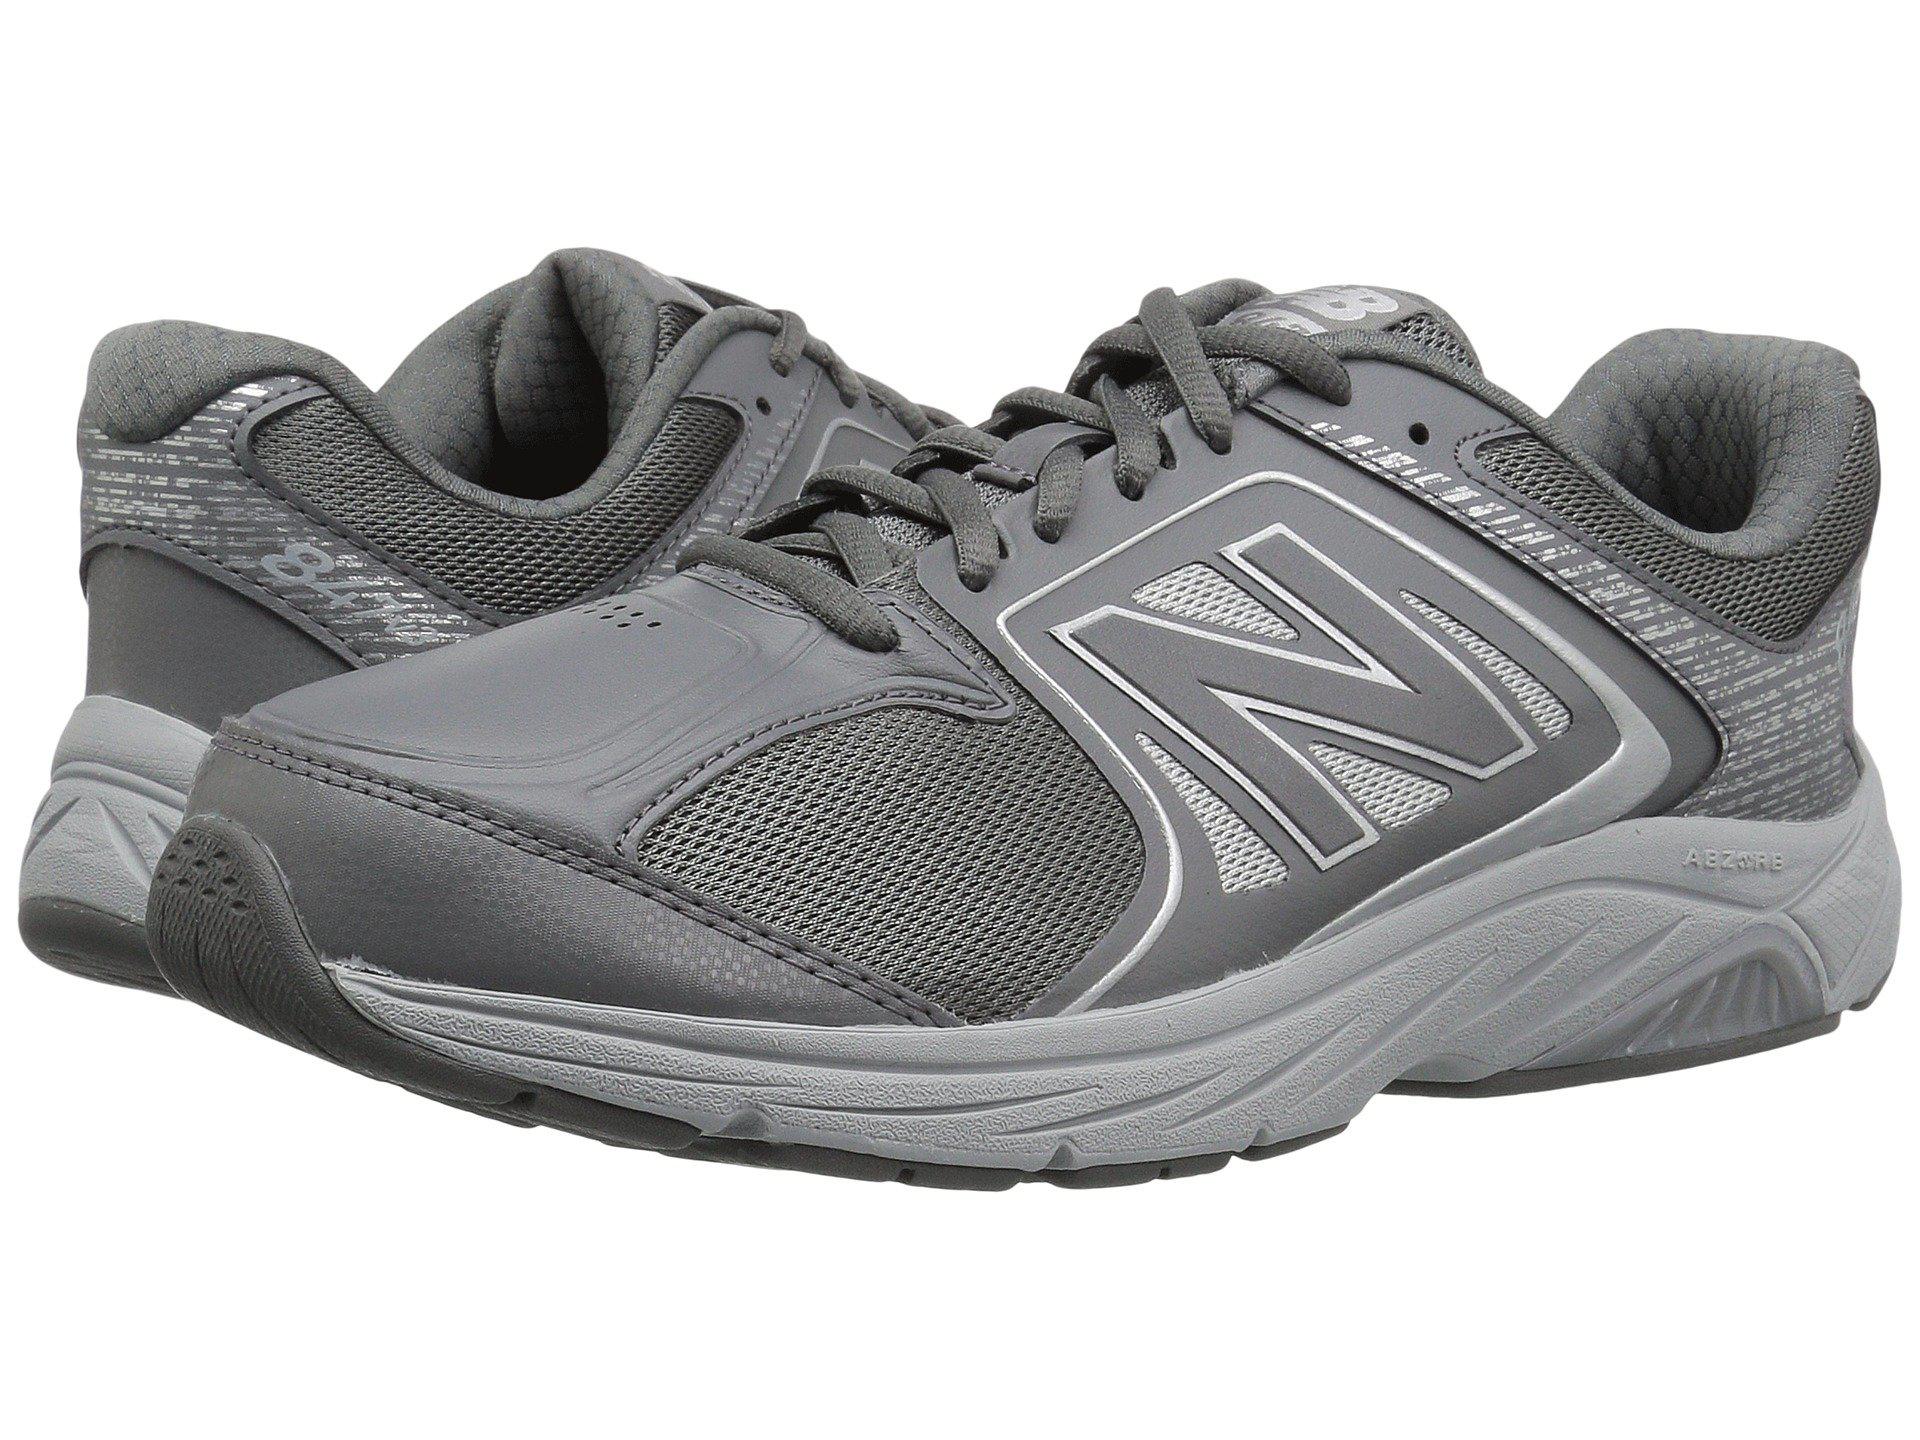 New Balance Synthetic 847v3 (grey/silver) Women's Walking Shoes in Gray ...